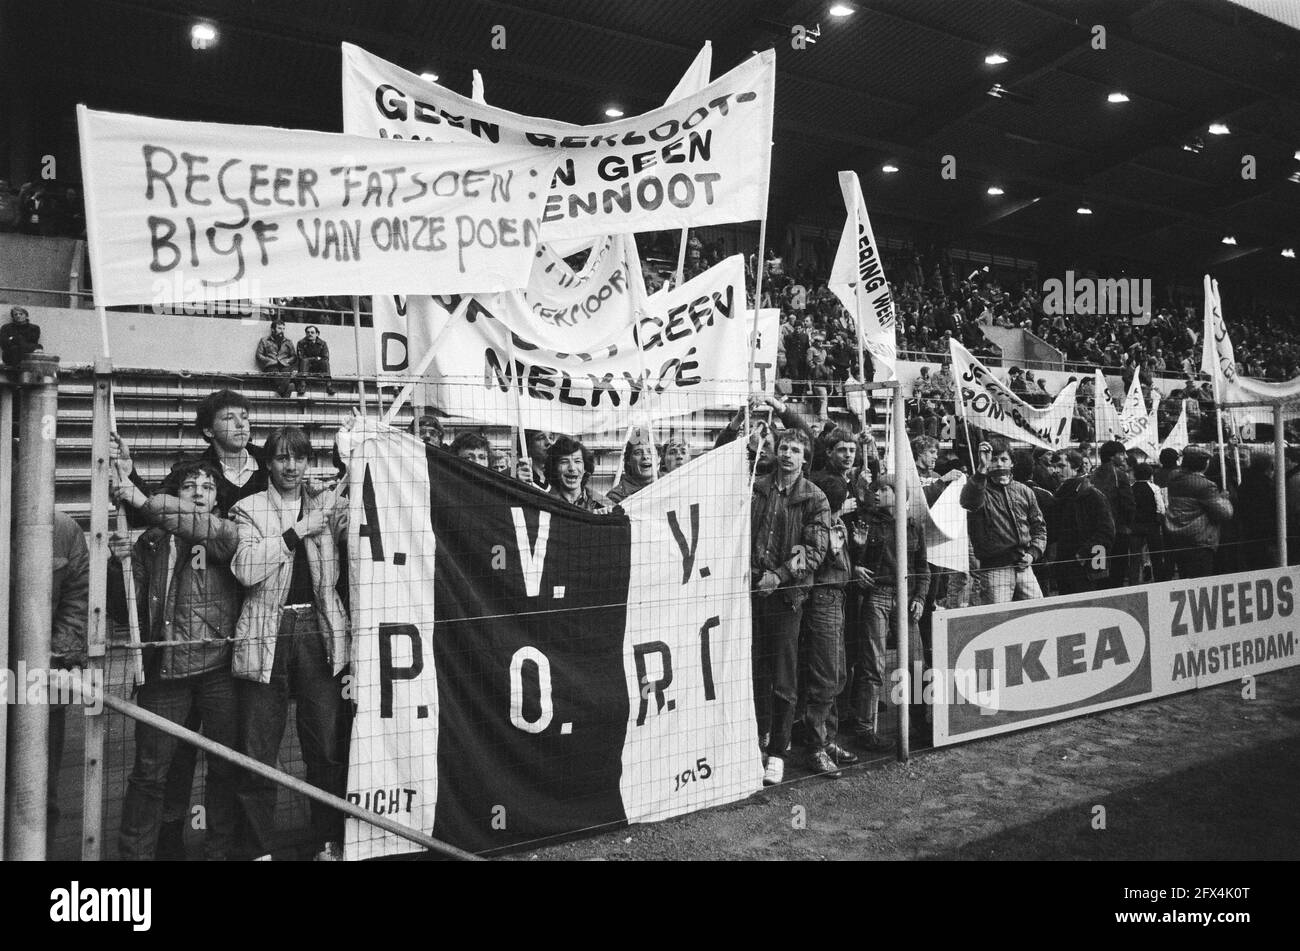 Demonstration during soccer Netherlands against Greece in PSV stadium against CRM plan to make soccer clubs pay corporation tax, April 14, 1982, Demonstration, sports, soccer, The Netherlands, 20th century press agency photo, news to remember, documentary, historic photography 1945-1990, visual stories, human history of the Twentieth Century, capturing moments in time Stock Photo